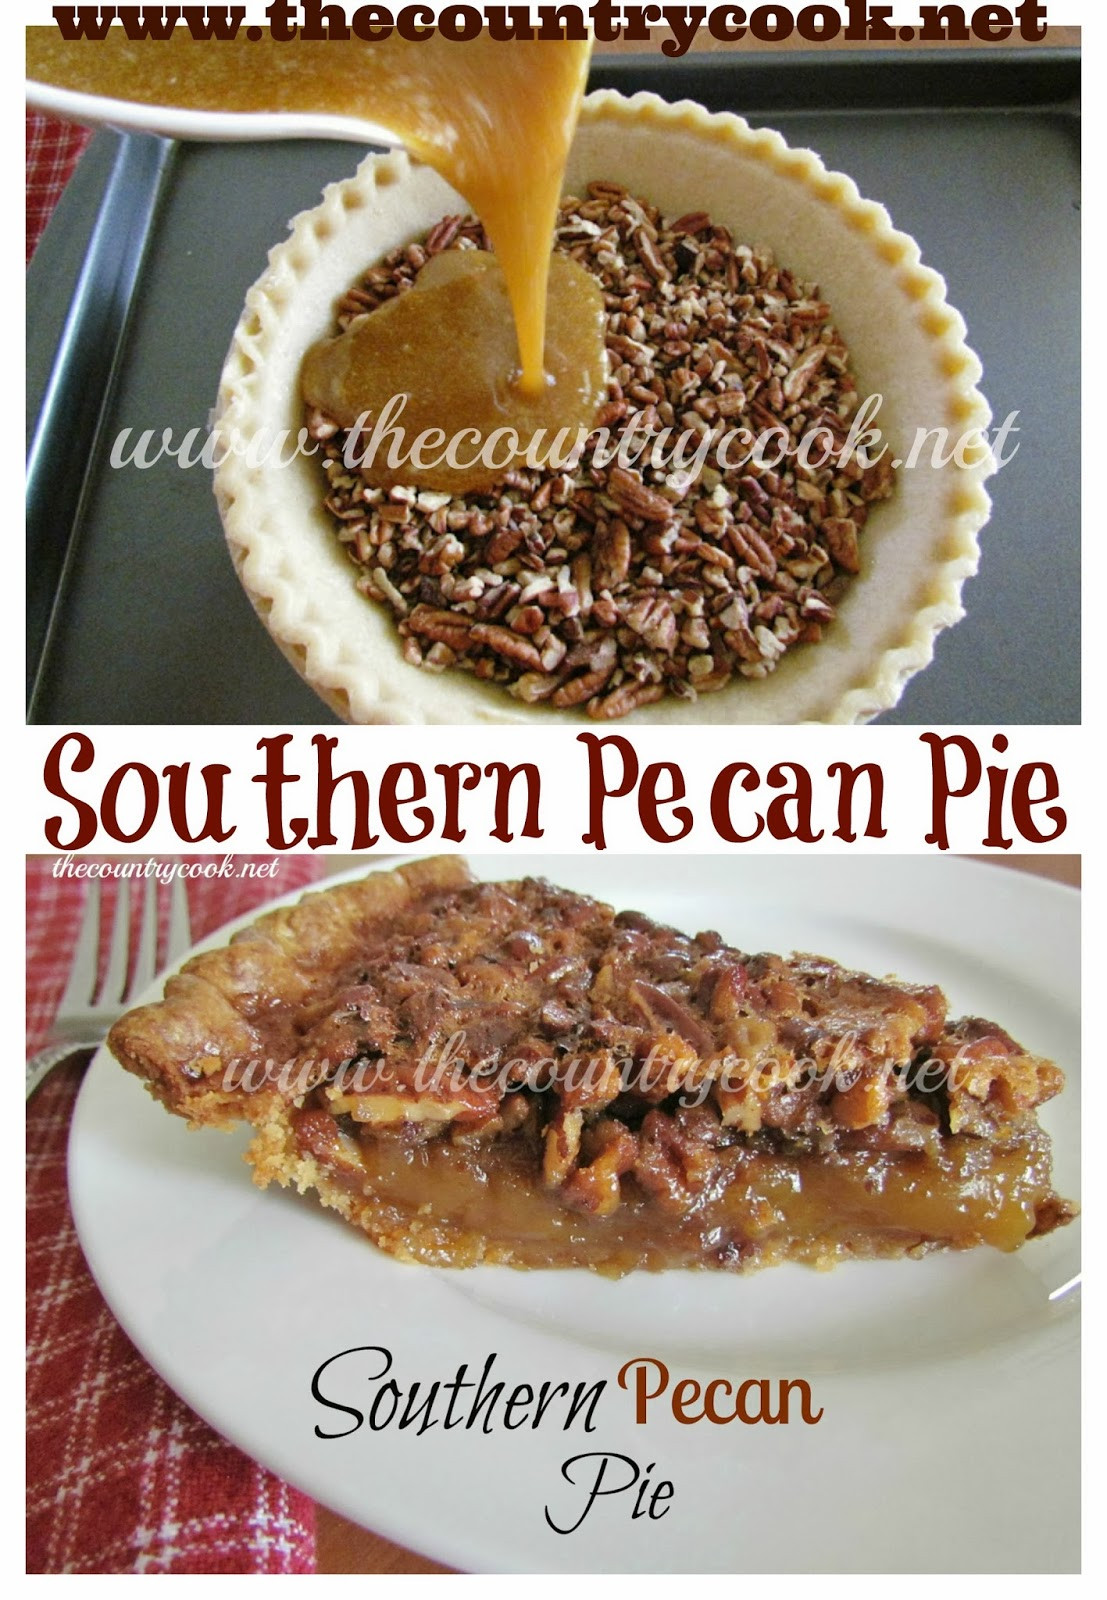 Southern Pecan Pie
 The Country Cook Southern Pecan Pie